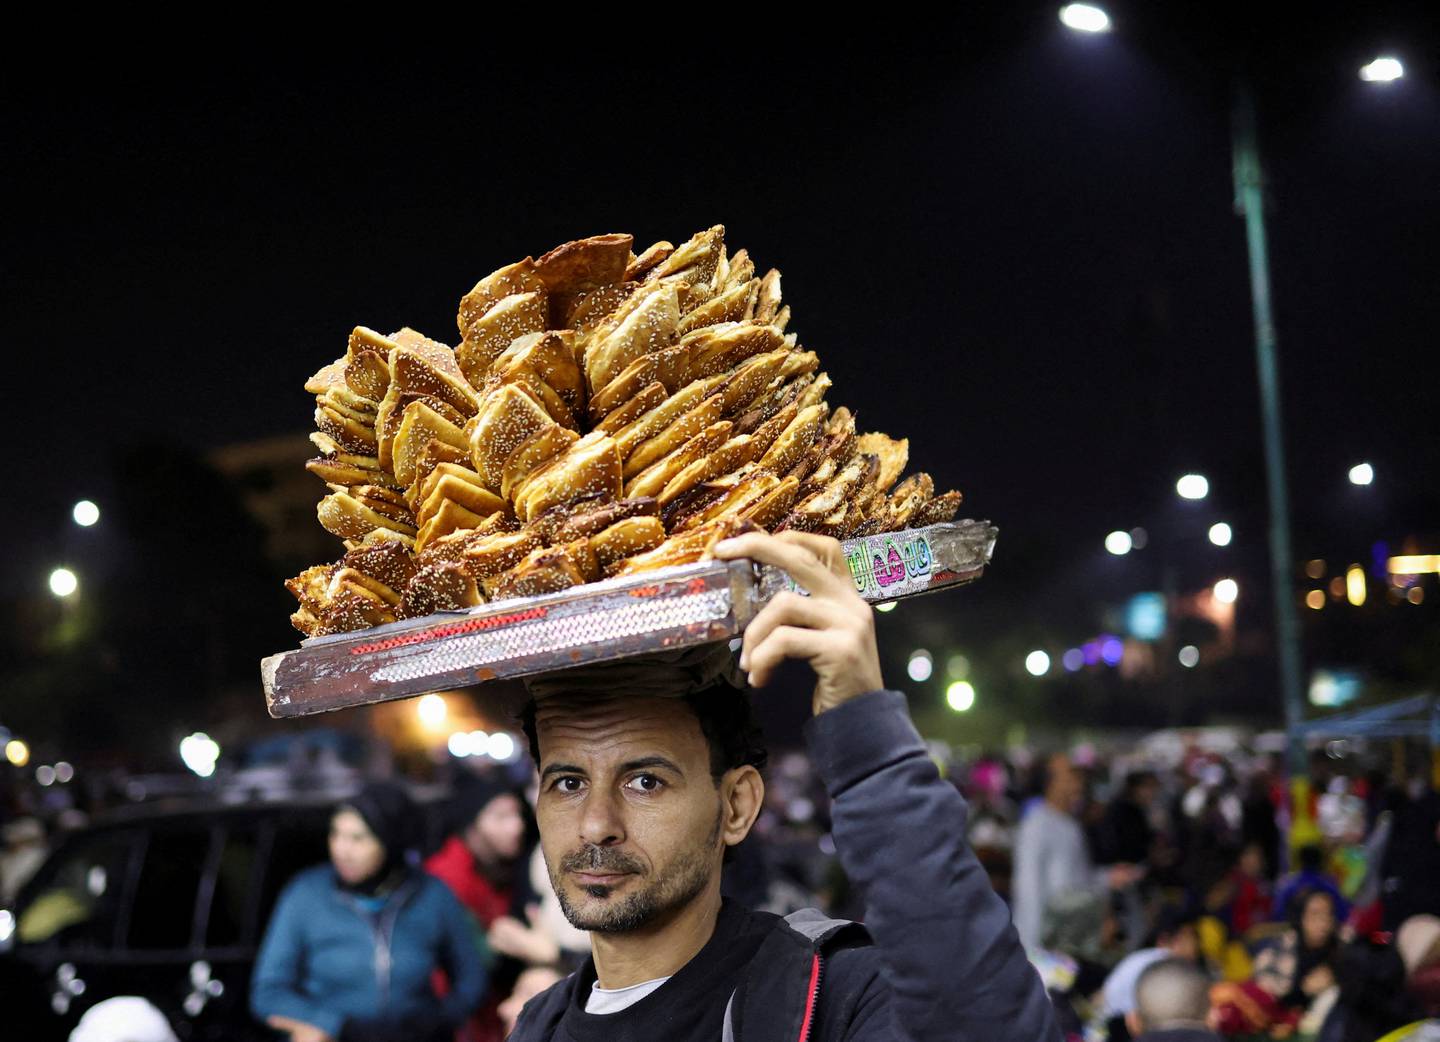 An Egyptian street vendor during a religious ceremony in Cairo. Reuters